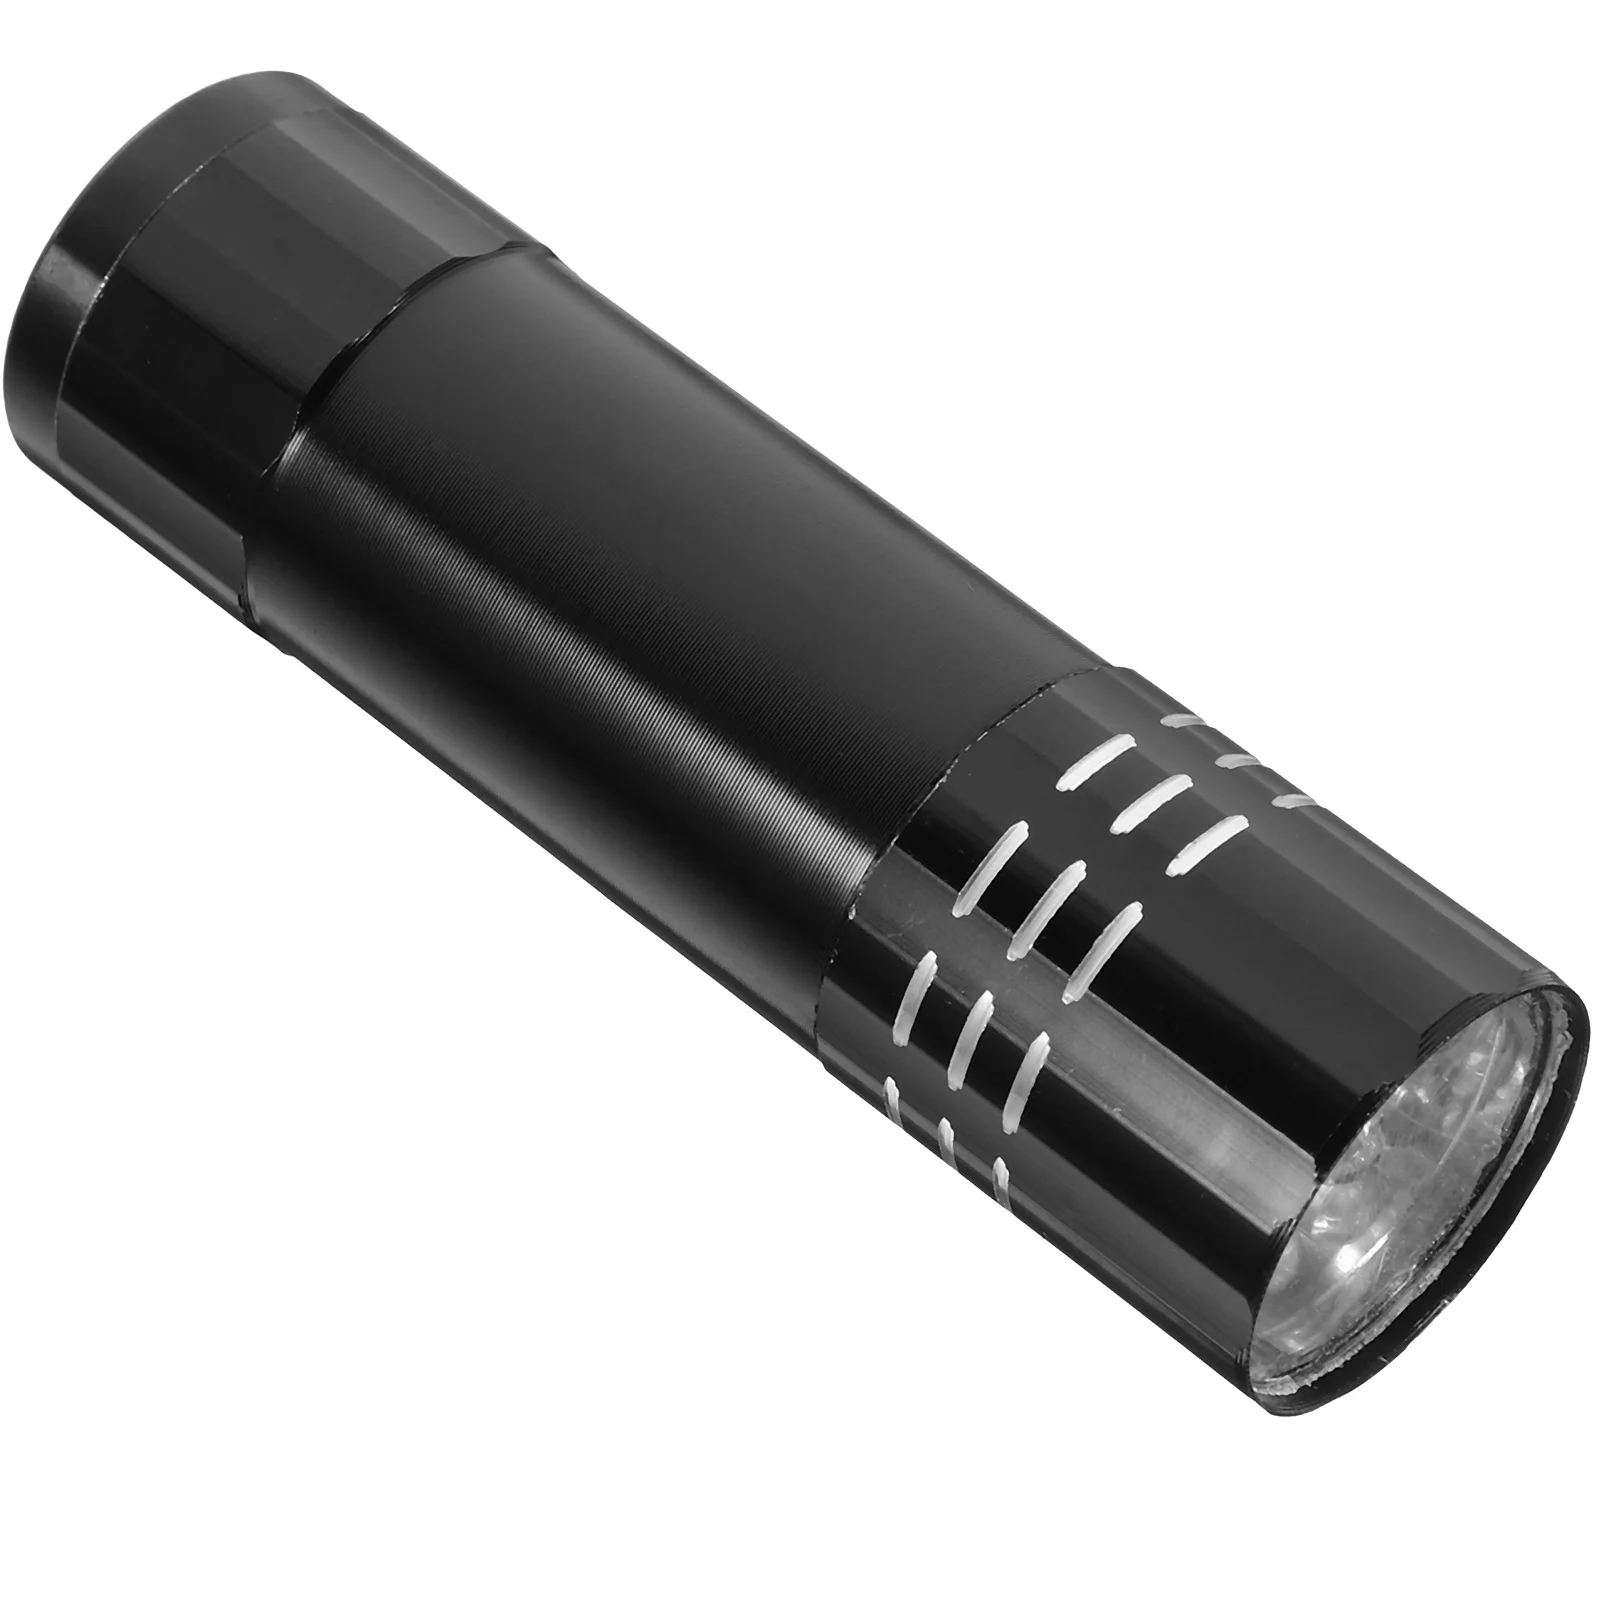 

Flashlight Hiding Box Hidden Compartments Containers Secret Storage Diversion Safes and Hide Key Can Cost of Money Flashlights